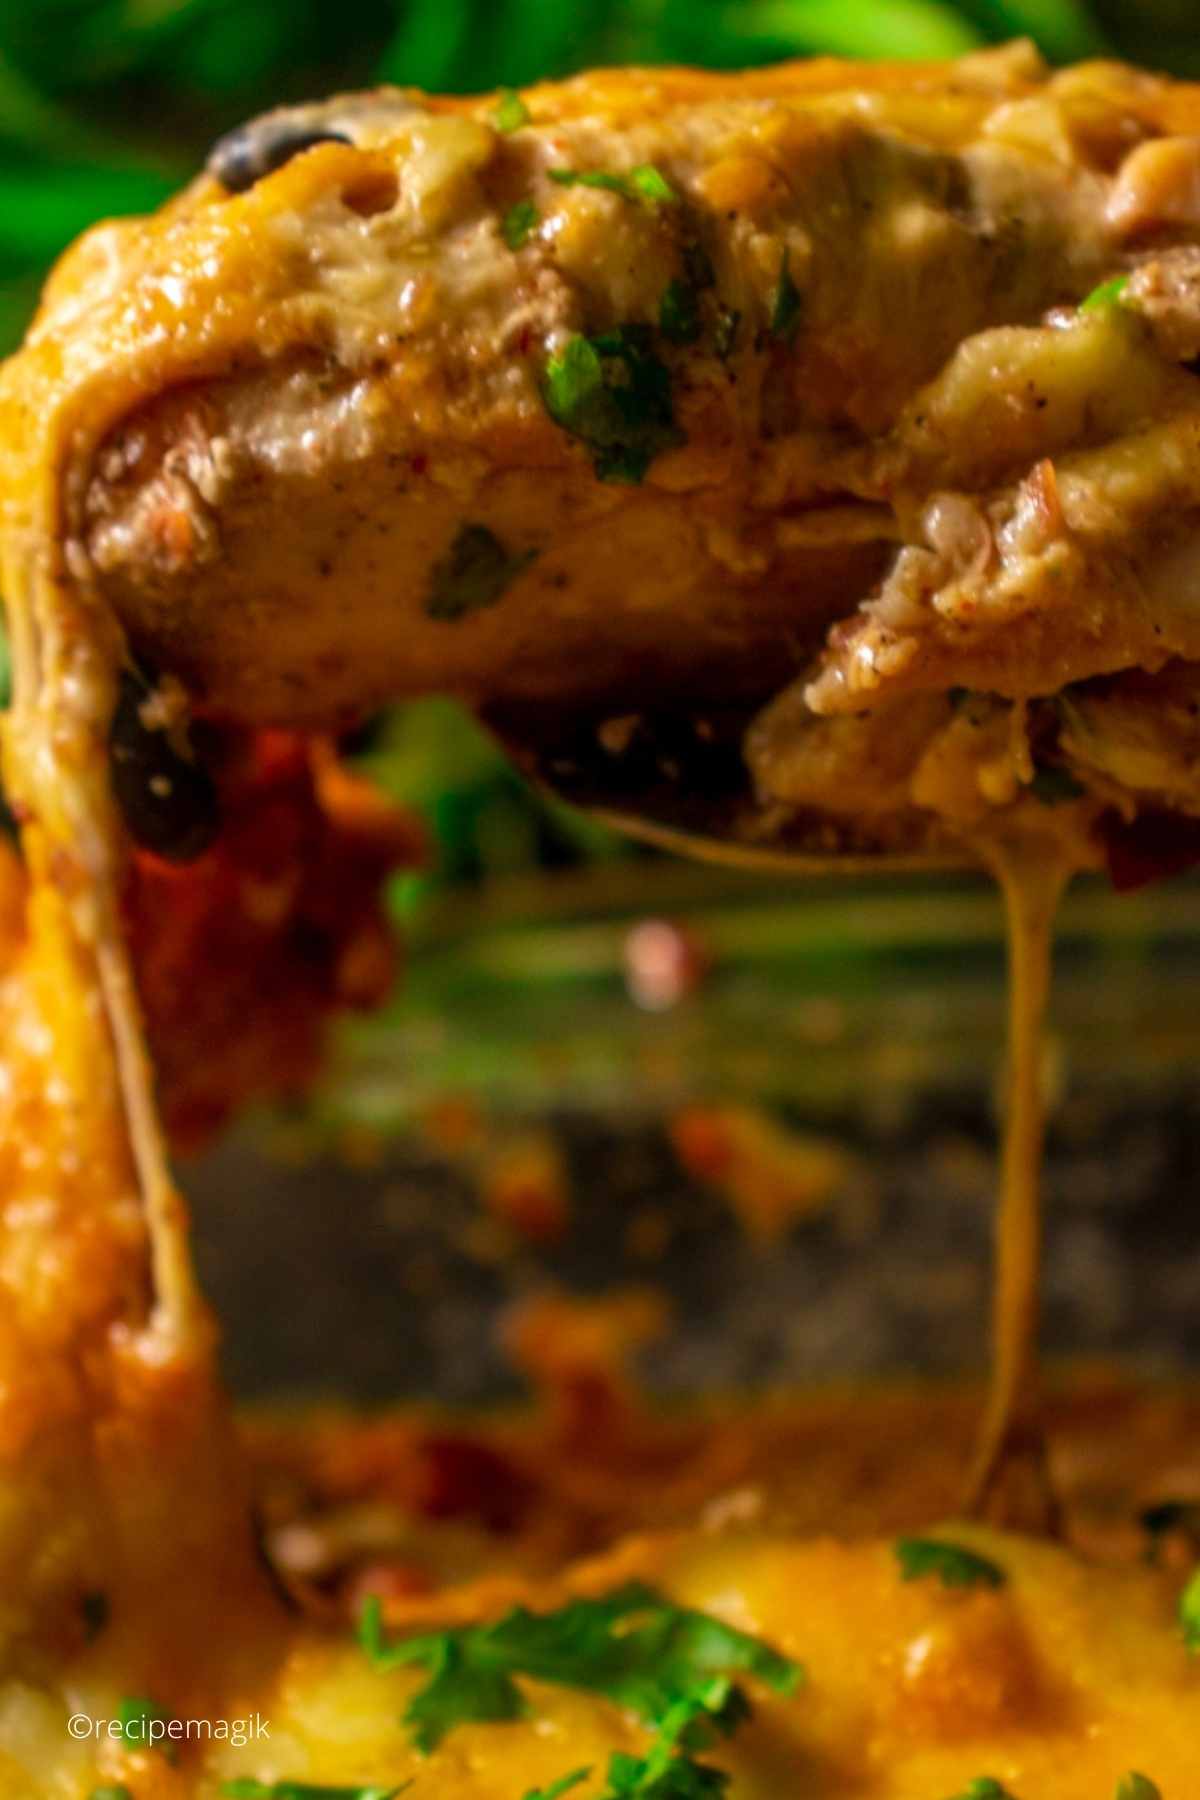 cheese pull shown while serving southwestern baked chicken